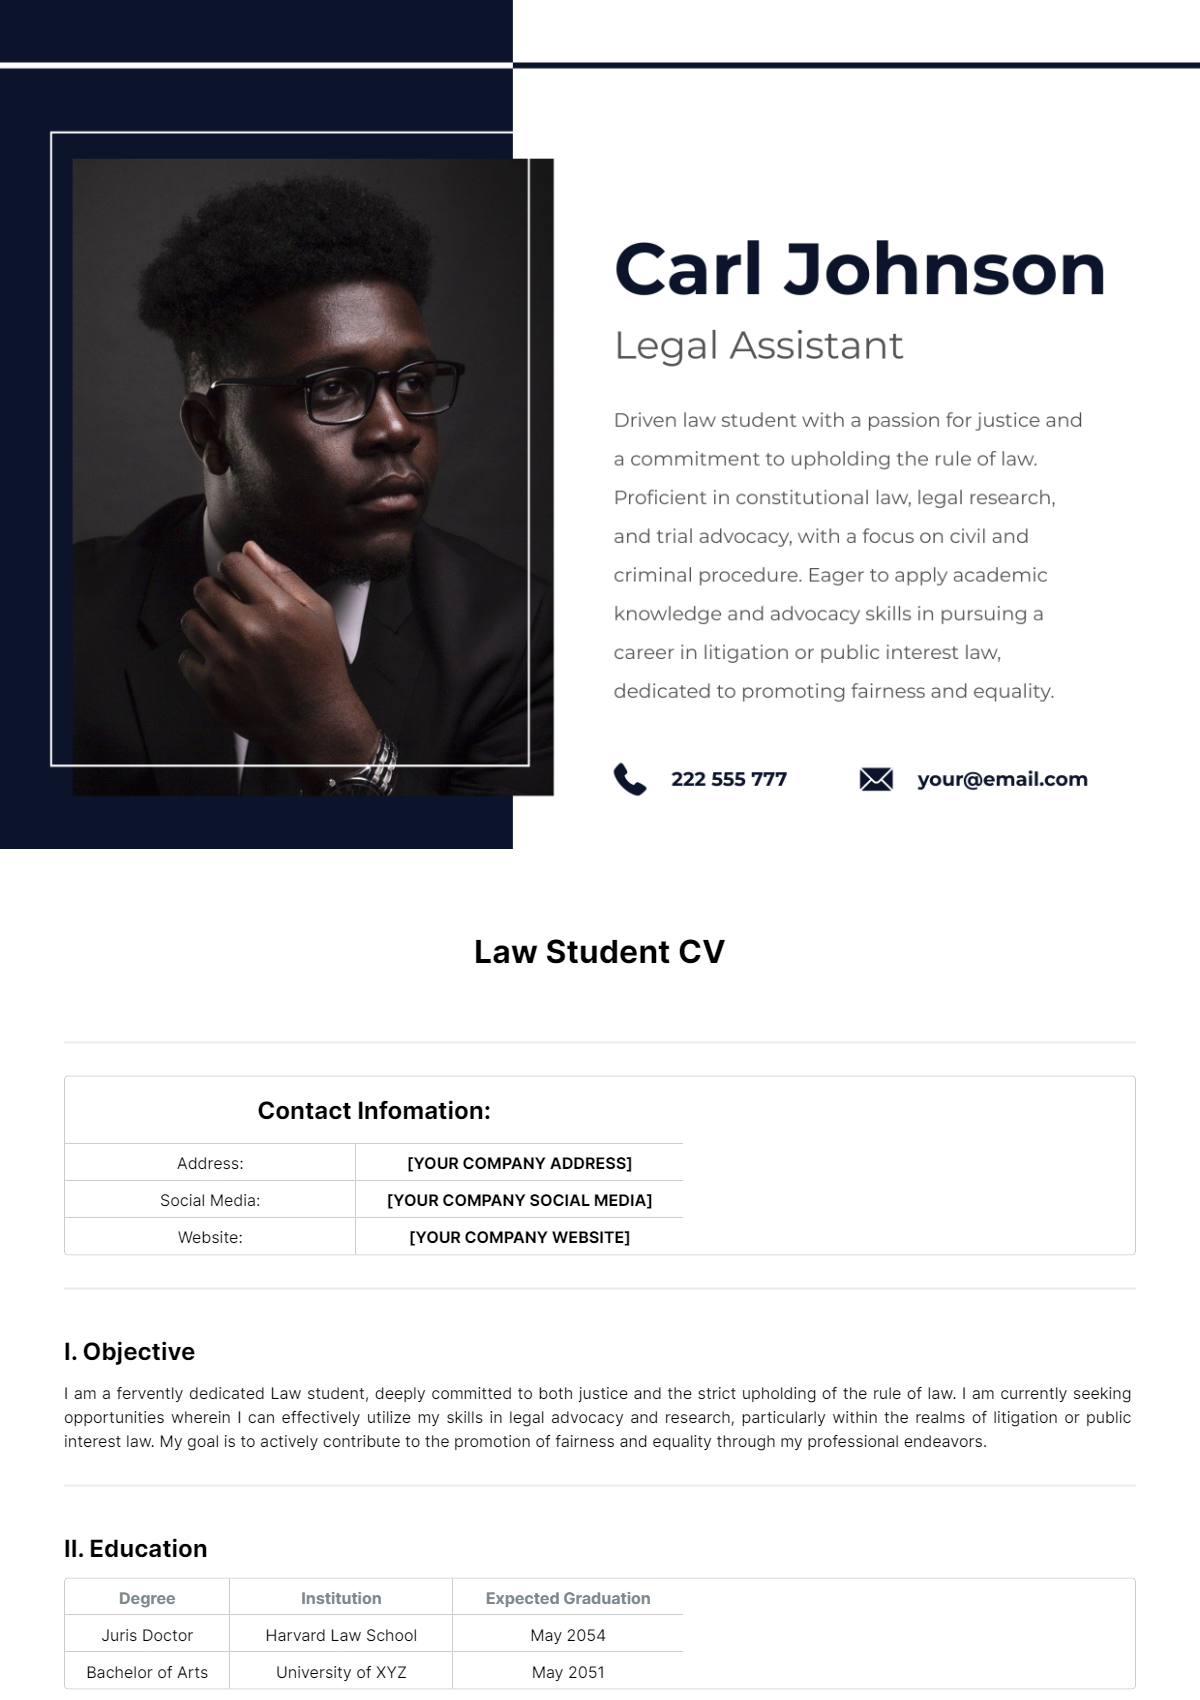 Law Student CV Template